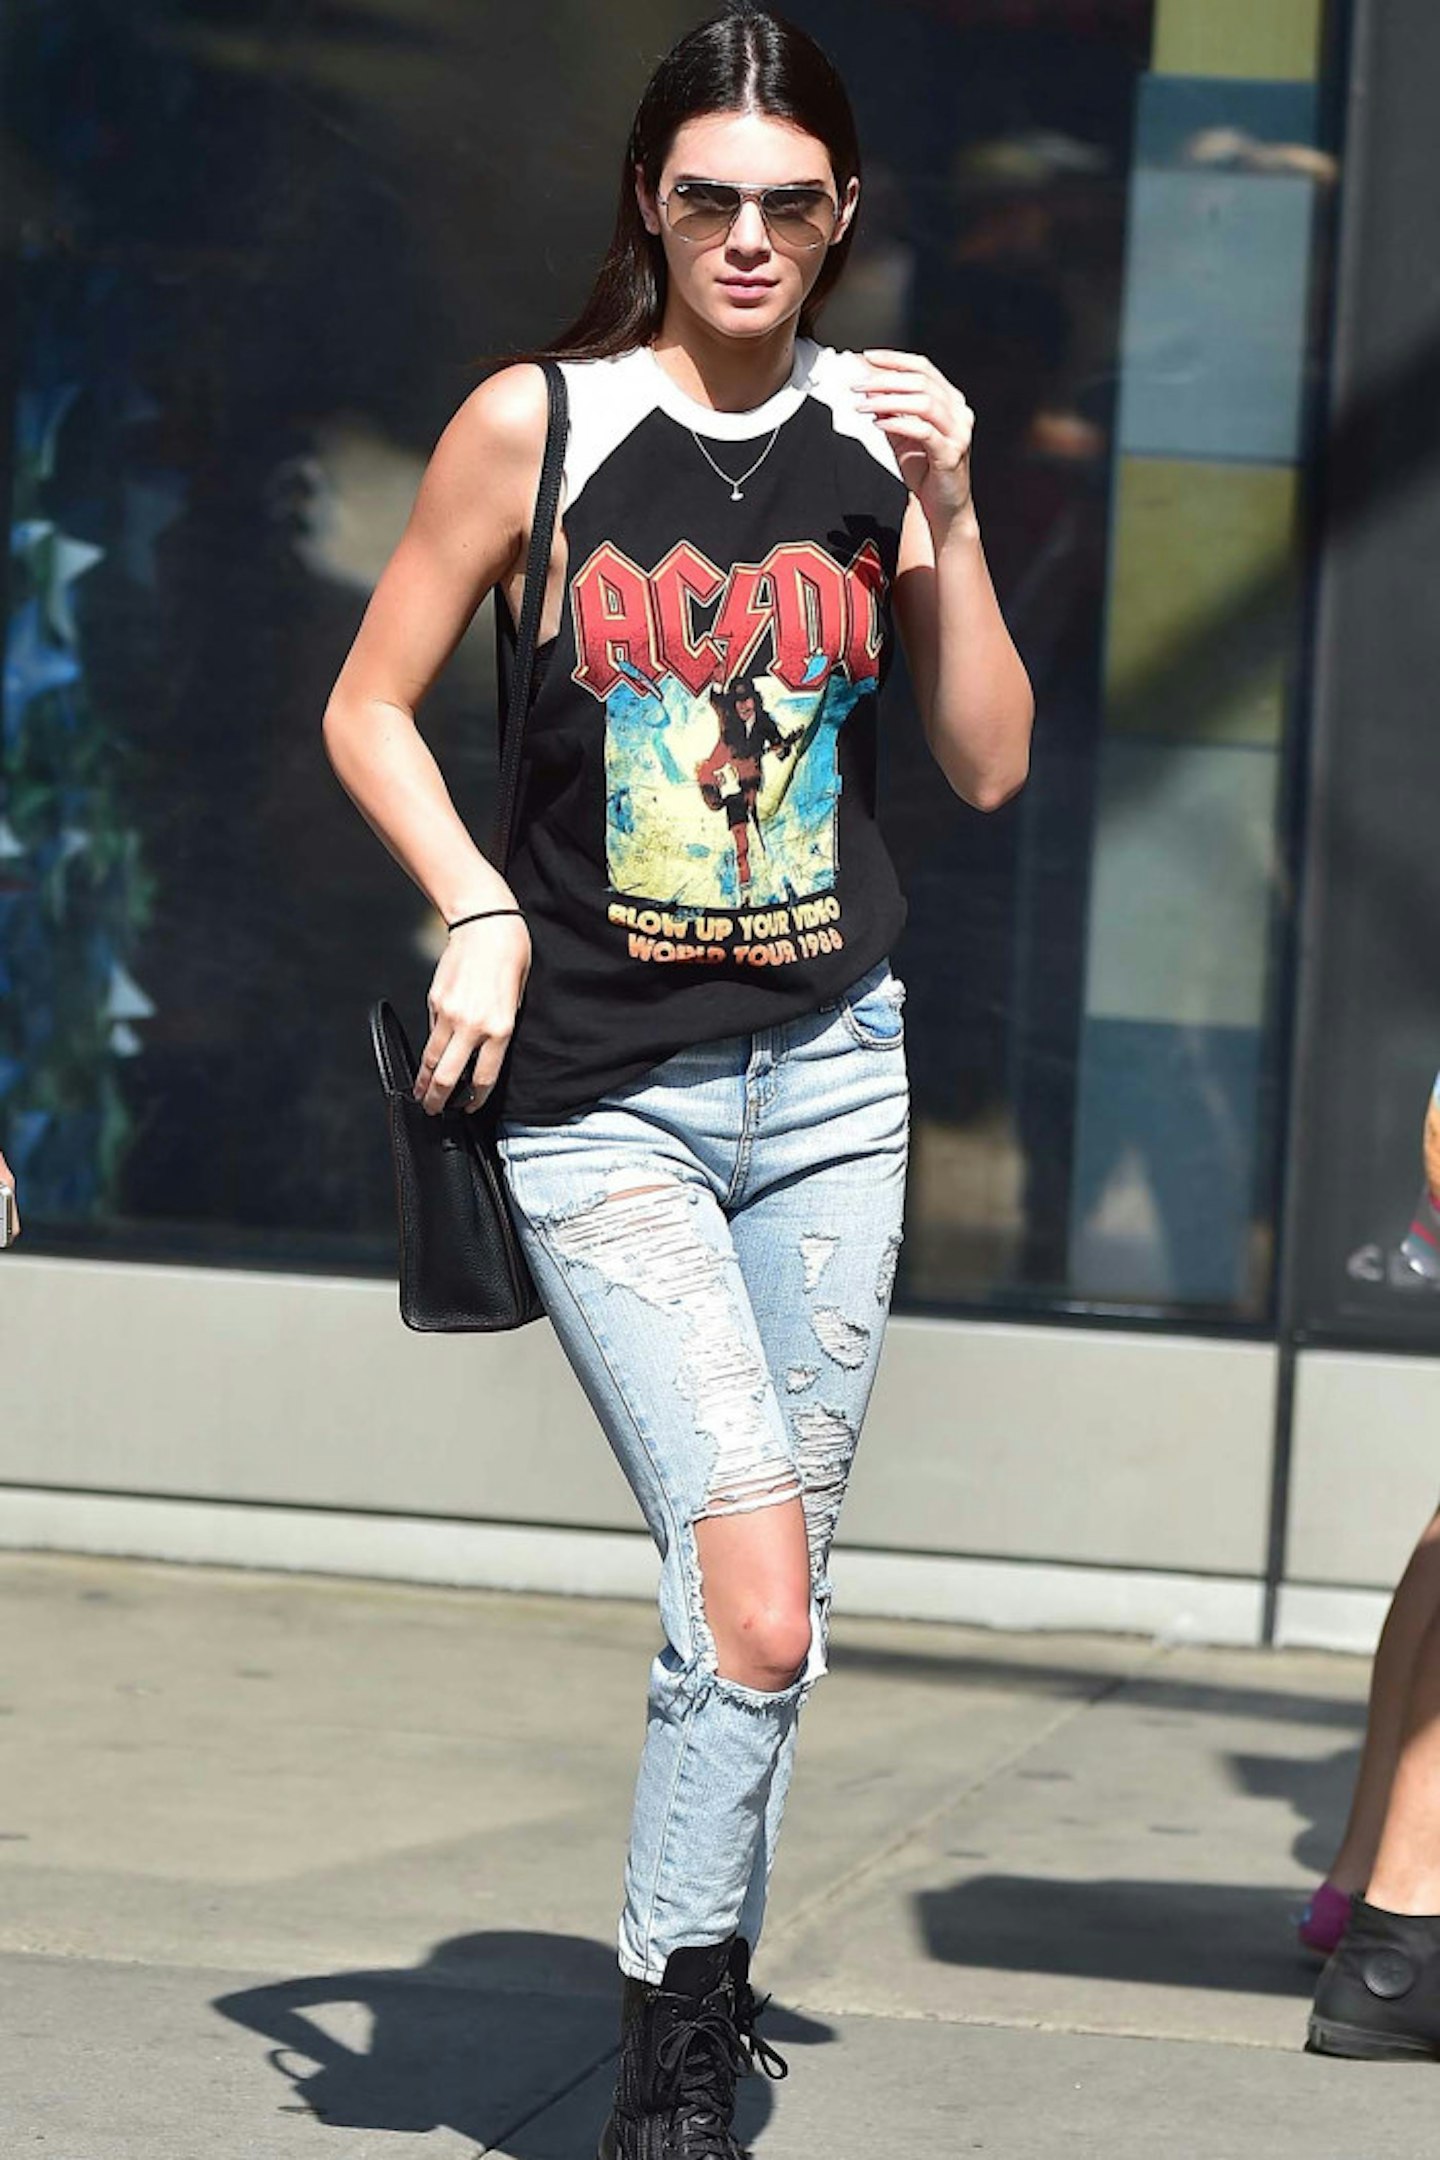 23-Kendall Jenner is seen leaving the movies in Union Square on July 3, 2014